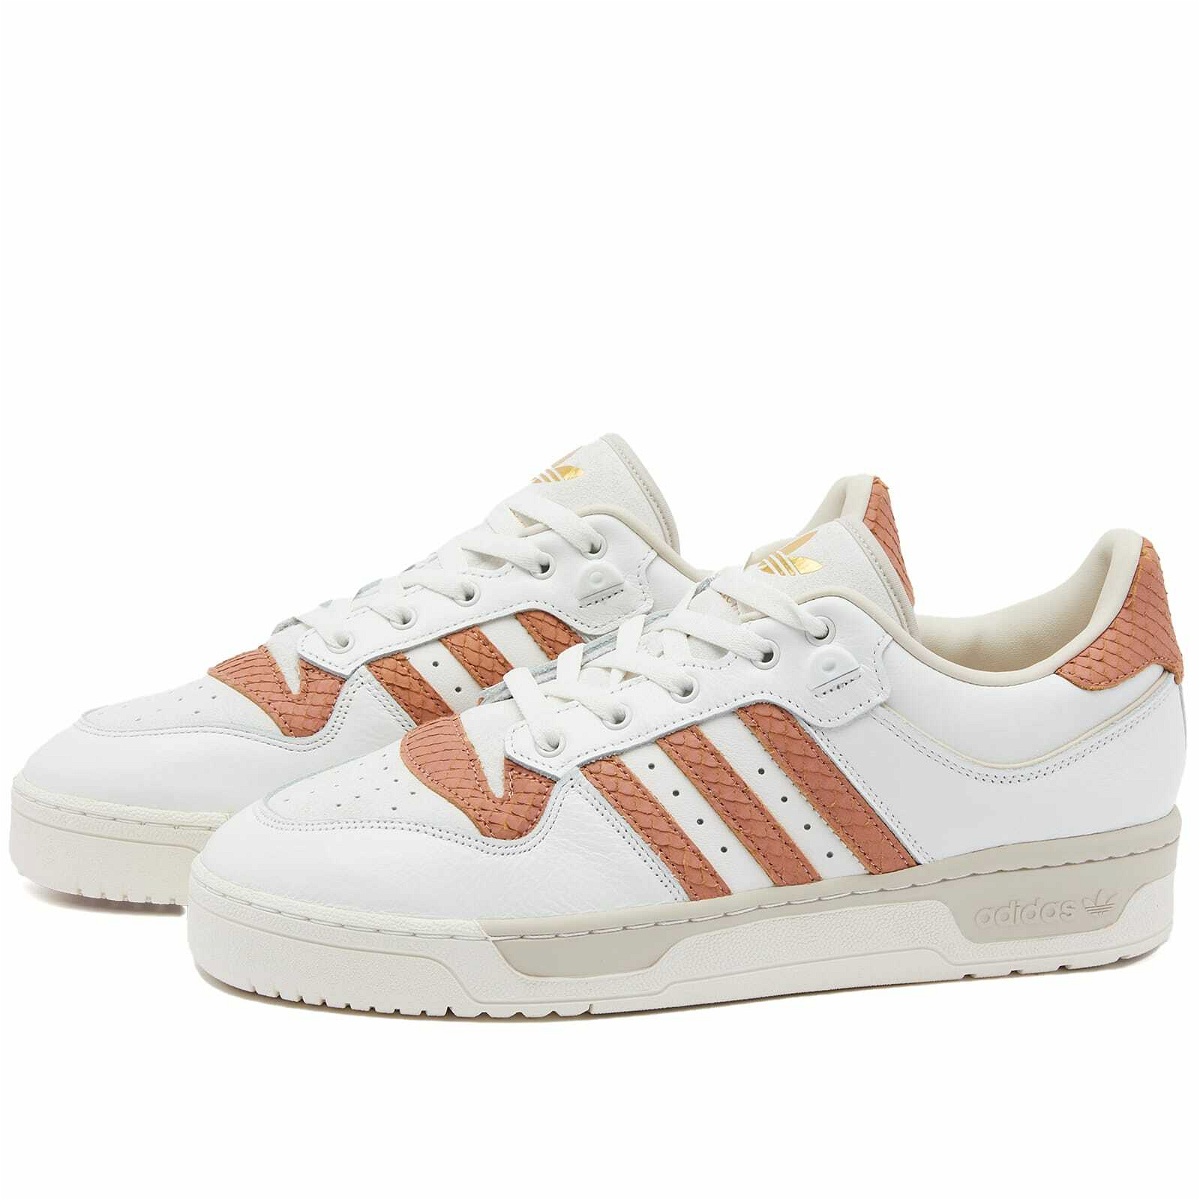 Adidas Rivalry Low 86 Core Strata Sneakers White/Clay in adidas